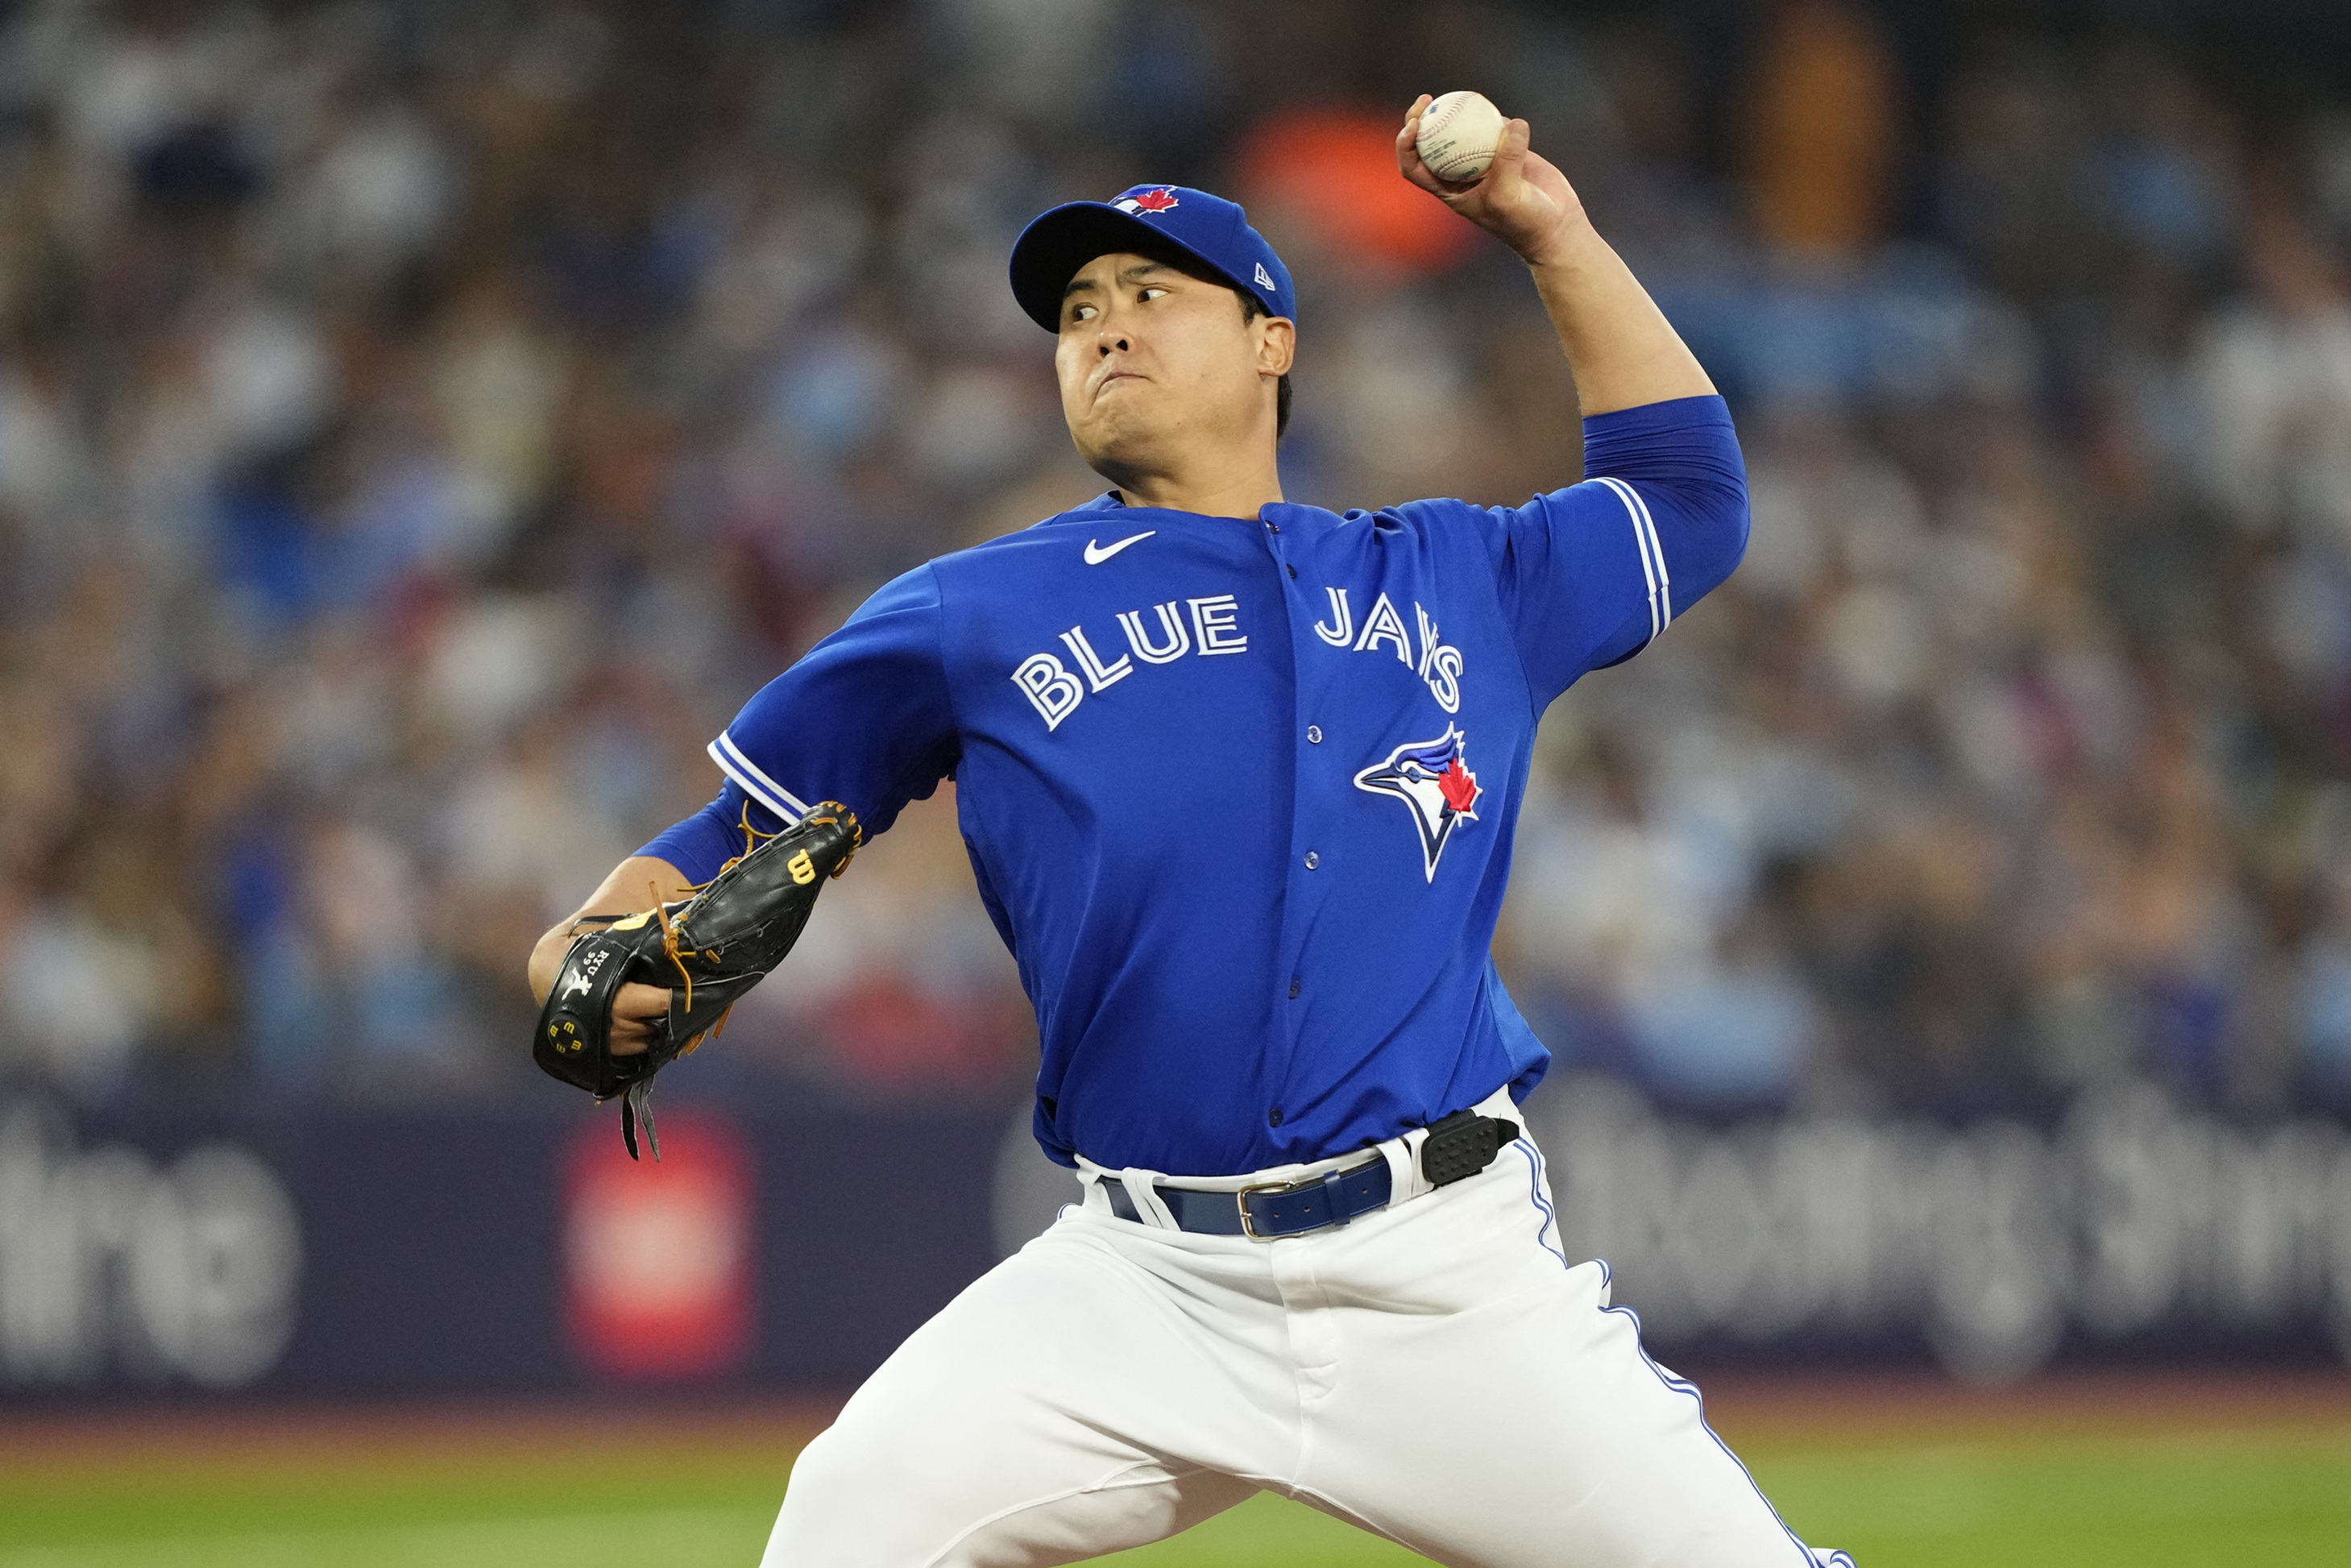 Toronto's Korean community excited after Blue Jays sign star pitcher  Hyun-Jin Ryu